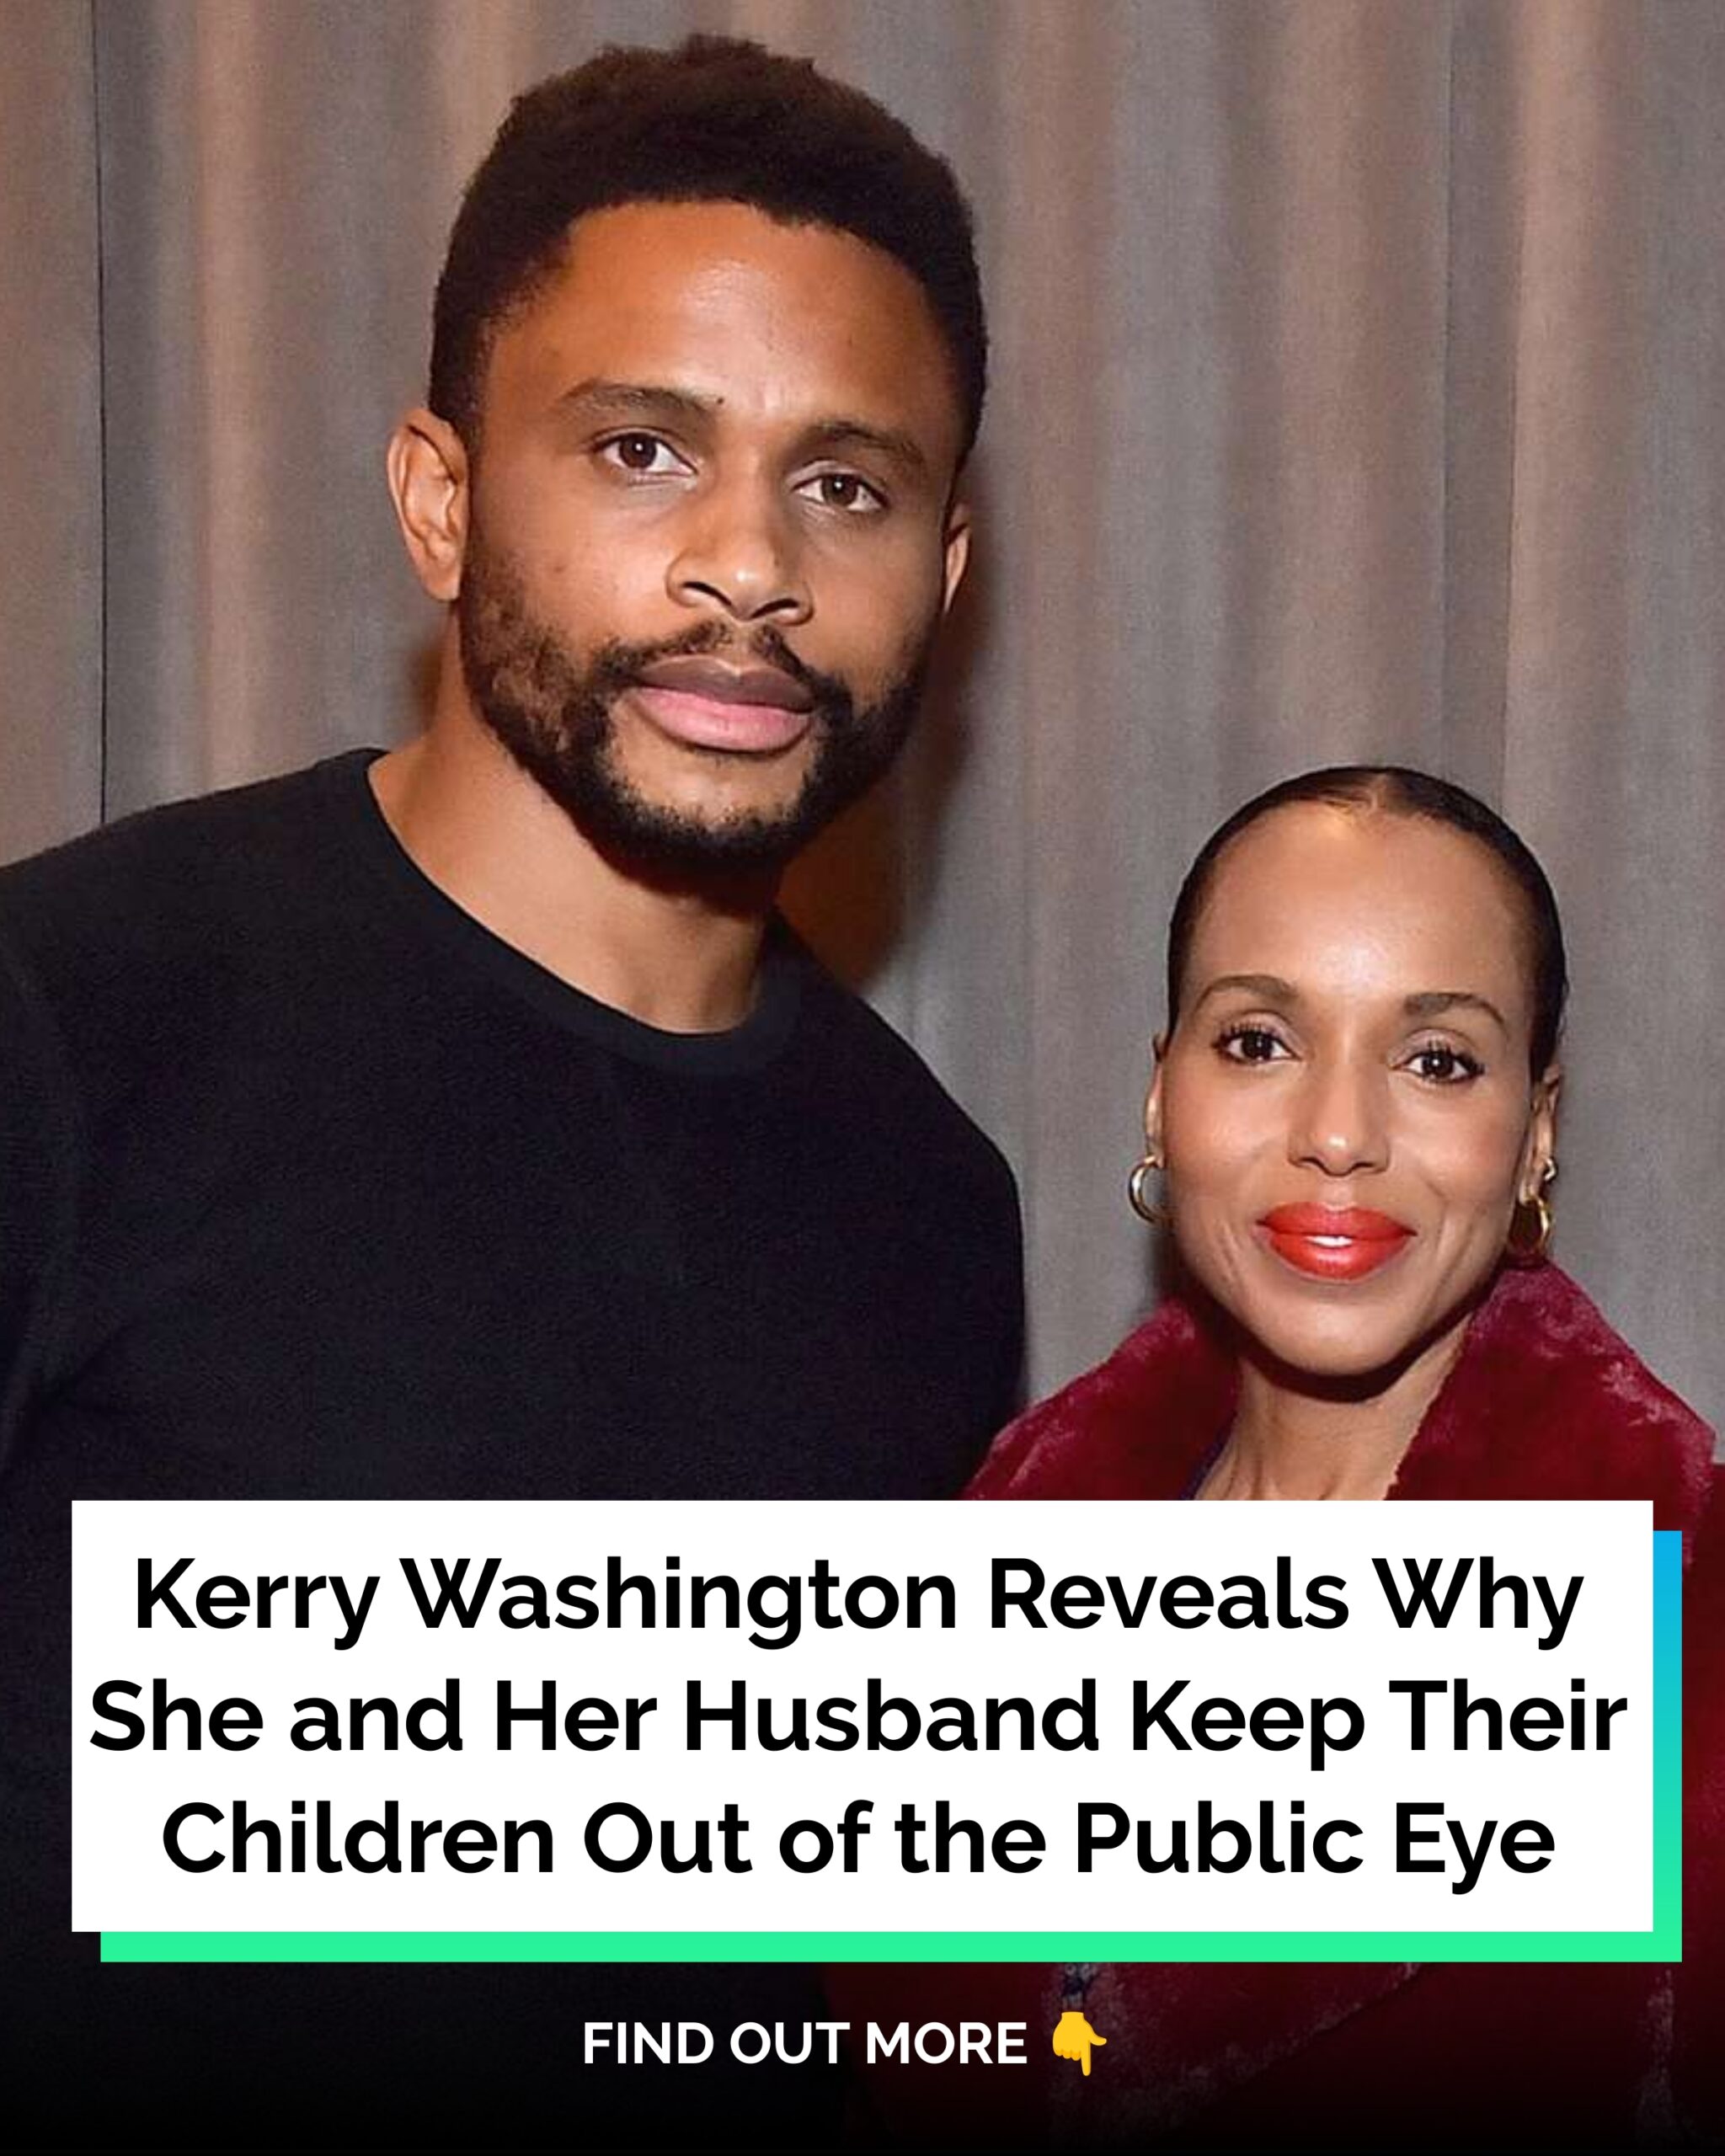 Kerry Washington Reveals Why She and Her Husband Keep Their Children Out of the Public Eye